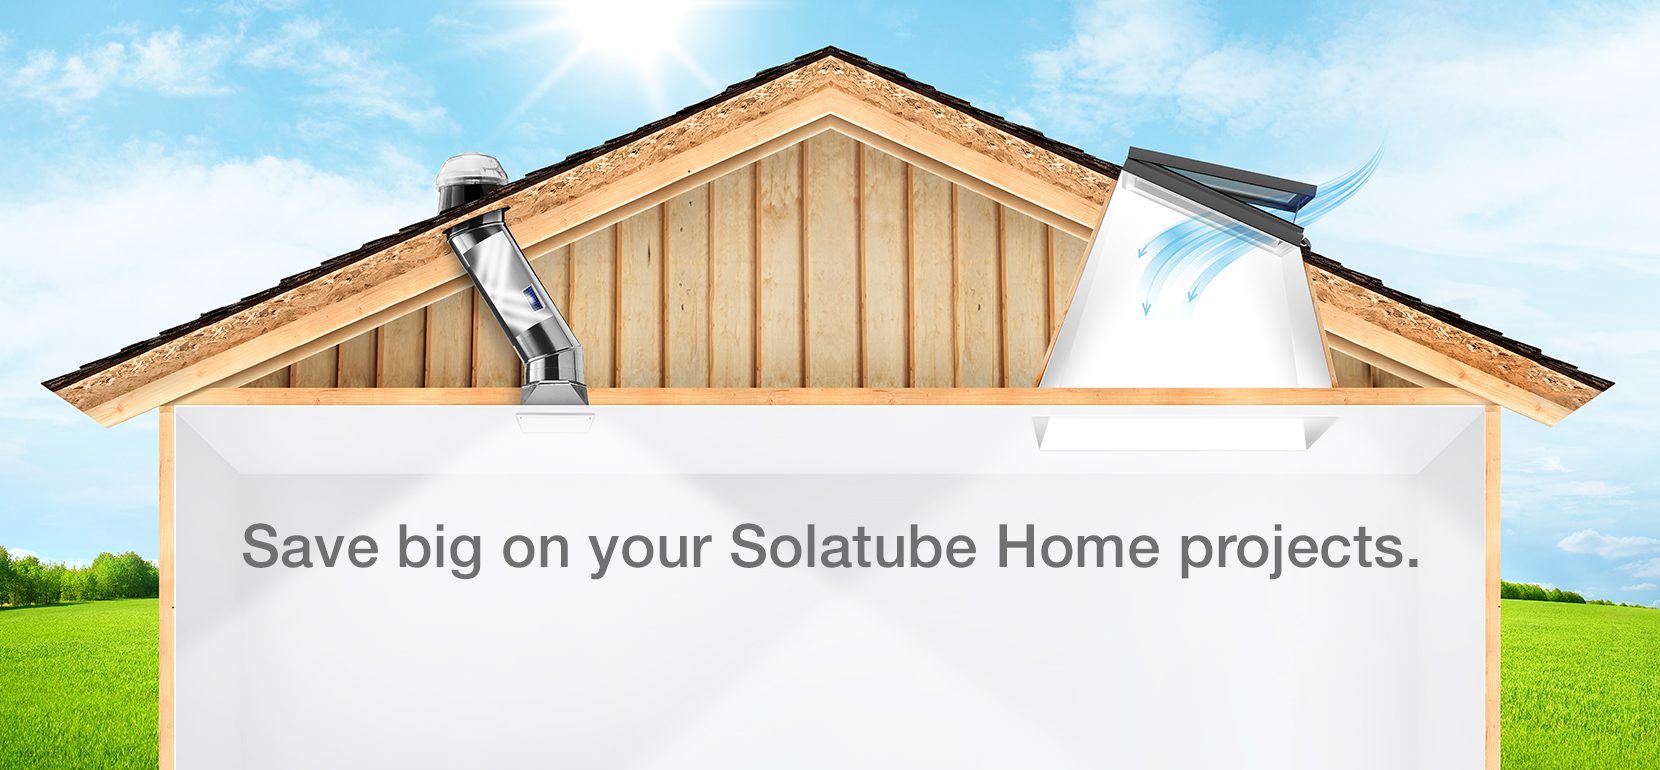 Solatube Home Promotions